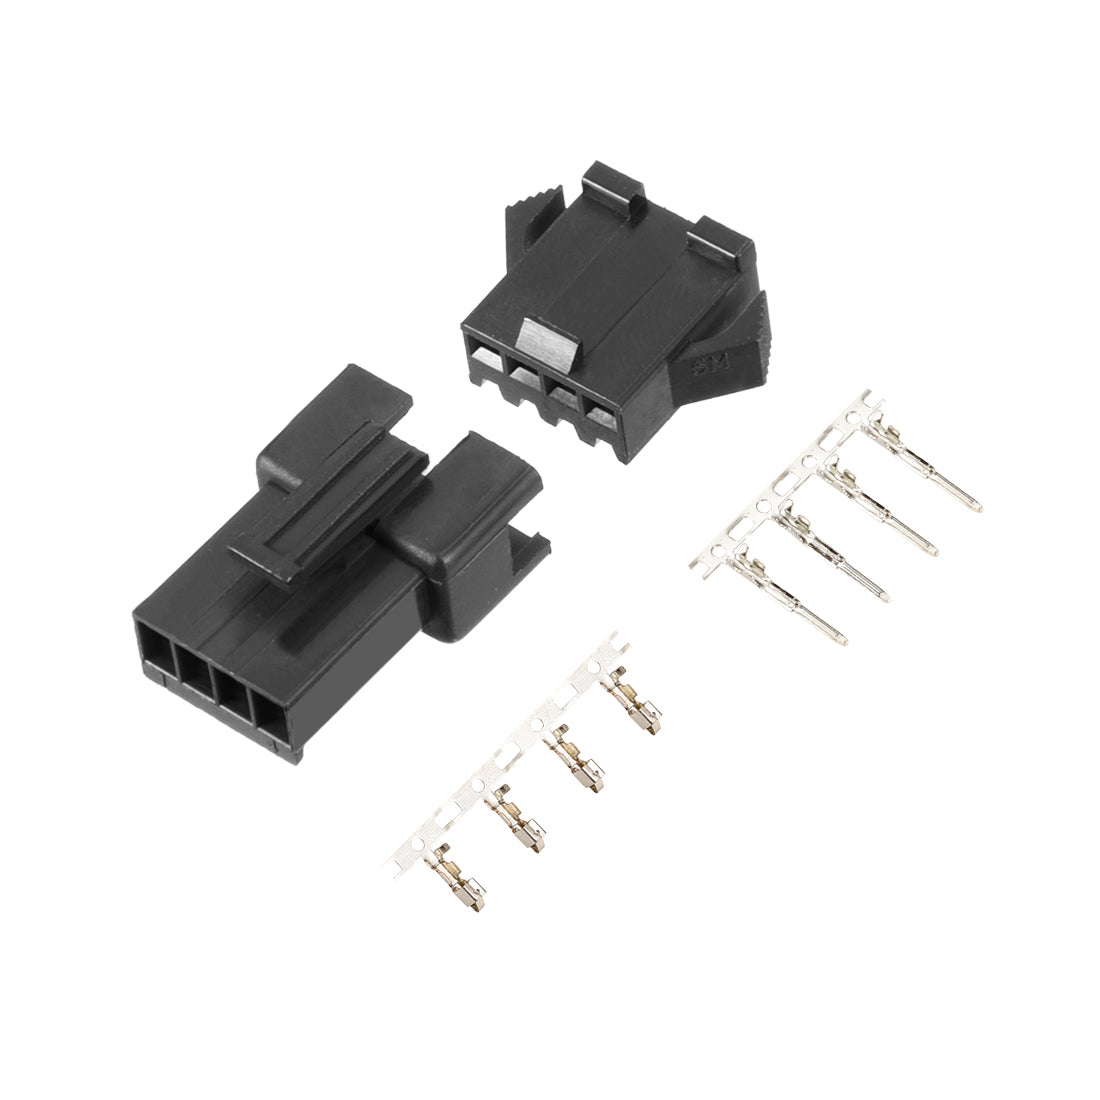 uxcell Uxcell 20 Pairs 2.54mm 4 Pin Black Plastic Male Female -SM Housing Crimp Terminal Connector